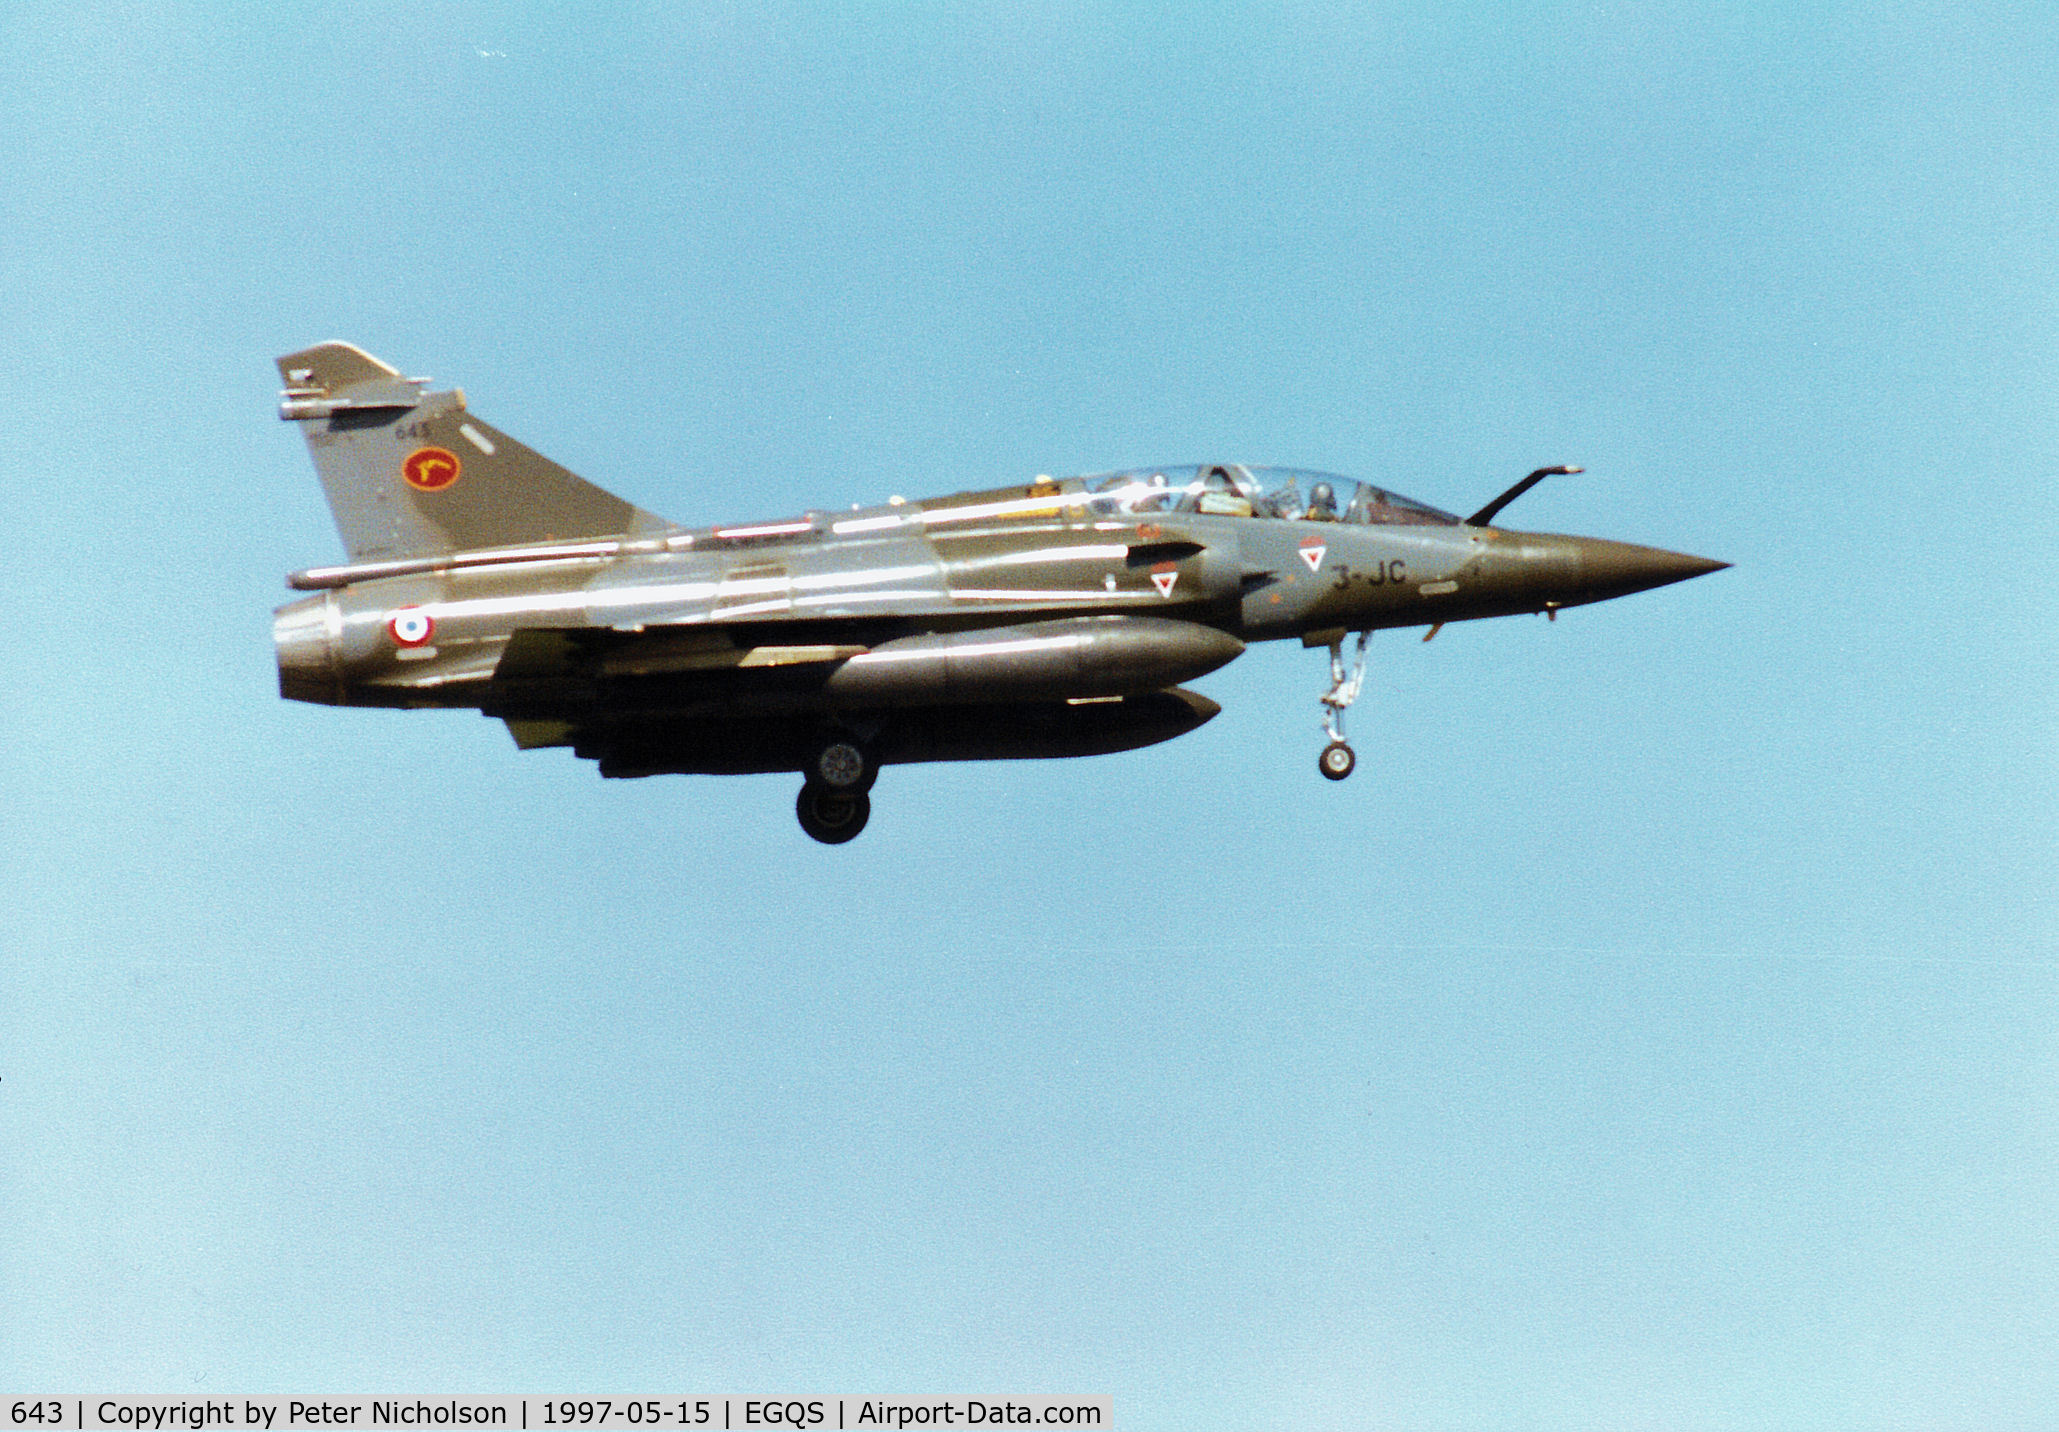 643, Dassault Mirage 2000D C/N 643, Mirage 2000D, callsign French Air Force 7320 Alpha, on final approach to Runway 05 at RAF Lossiemouth in May 1997.